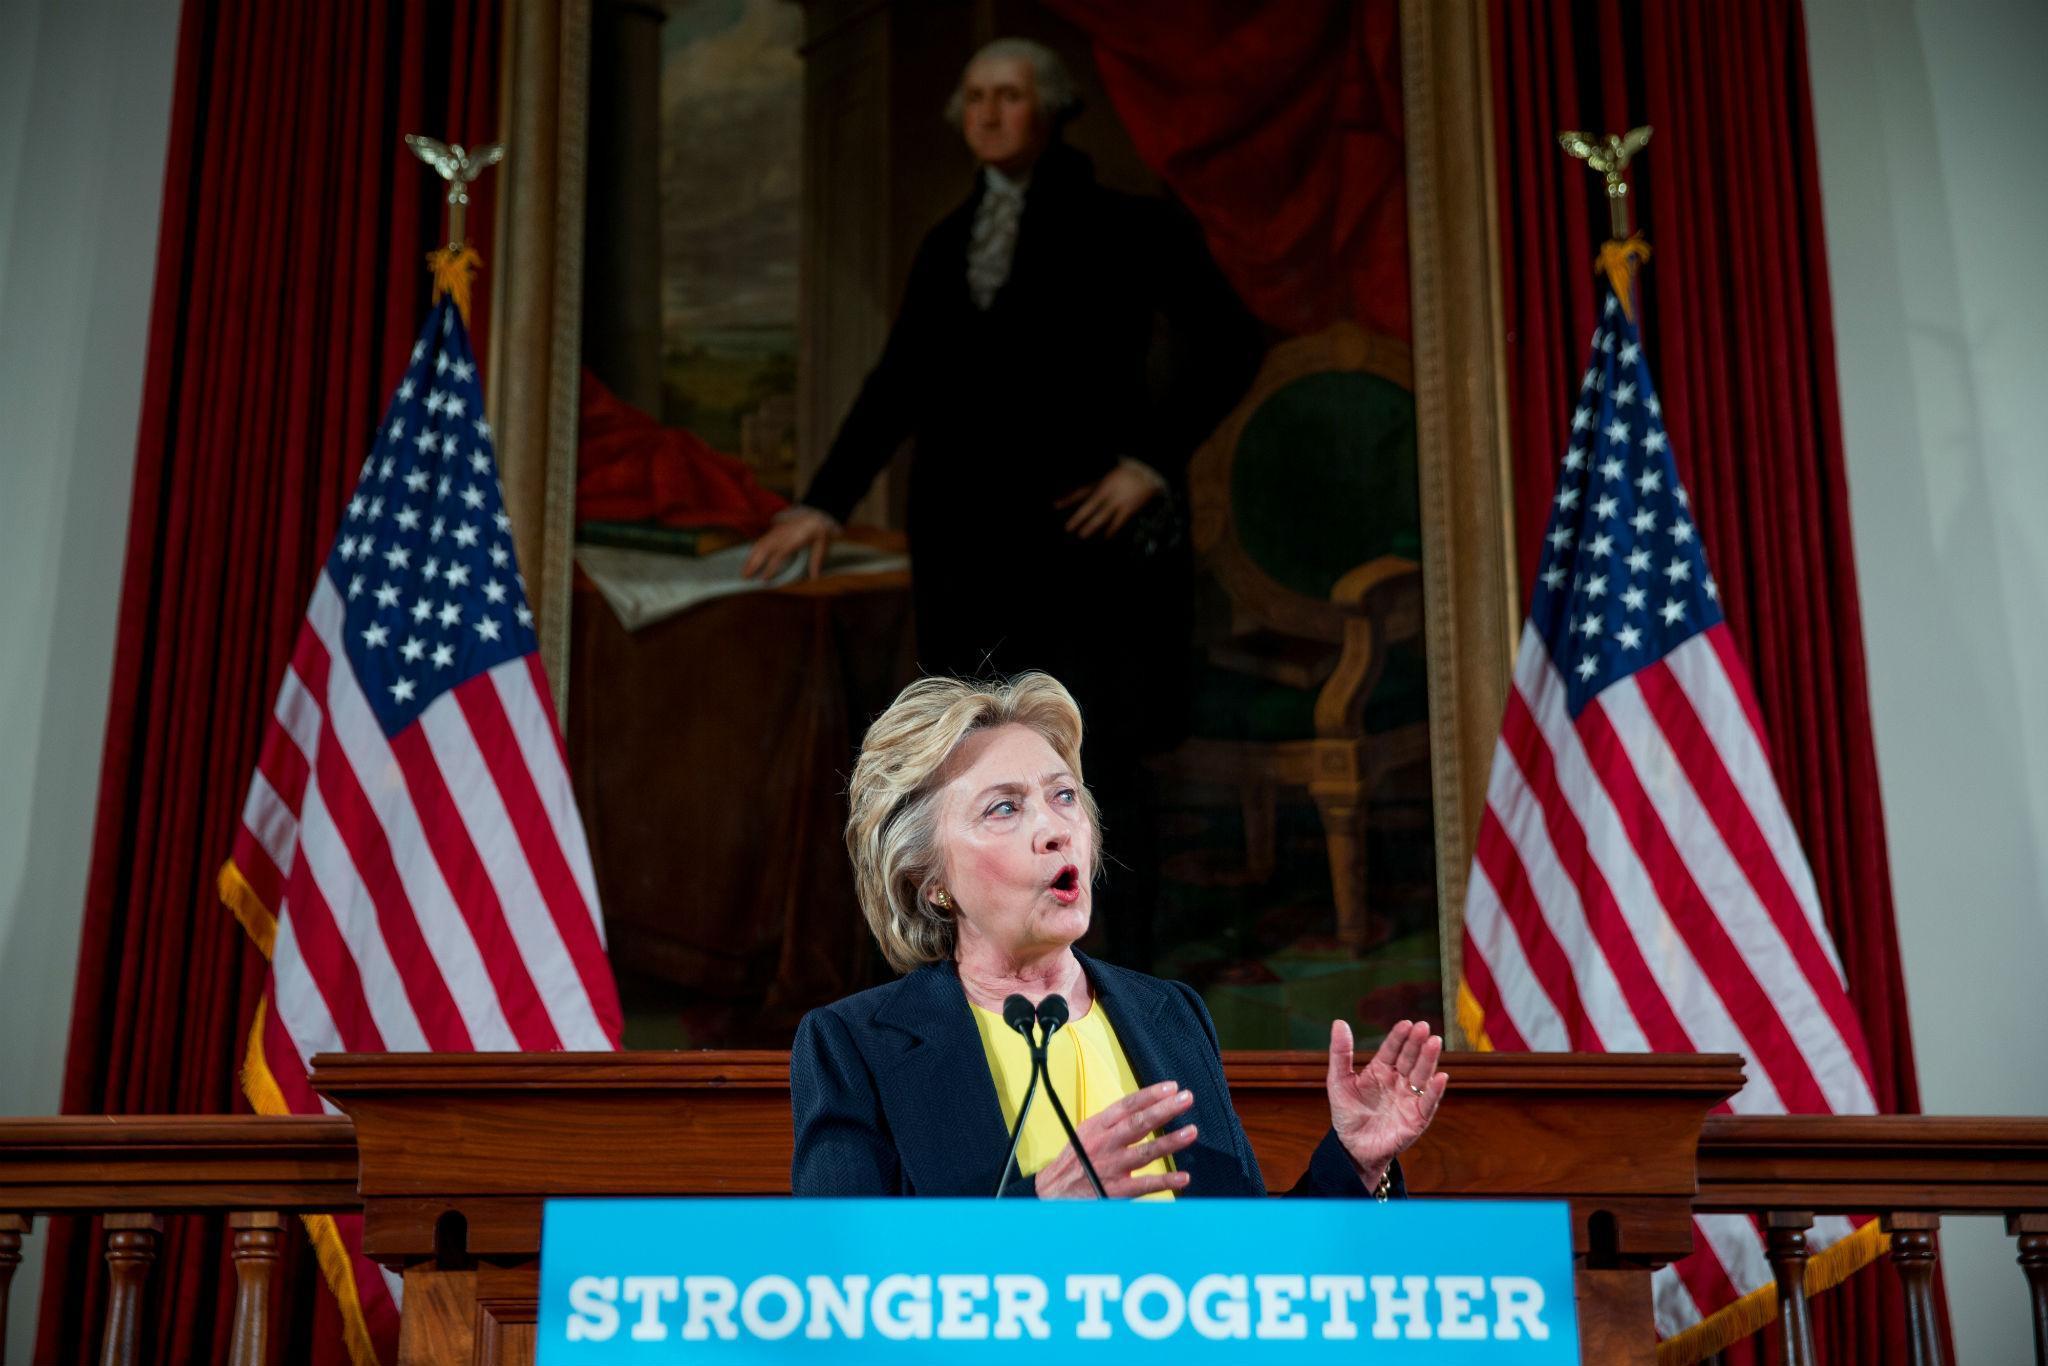 Hillary Clinton speaks beneath a portrait of George Washington at the Illinois Old State House in Springfield